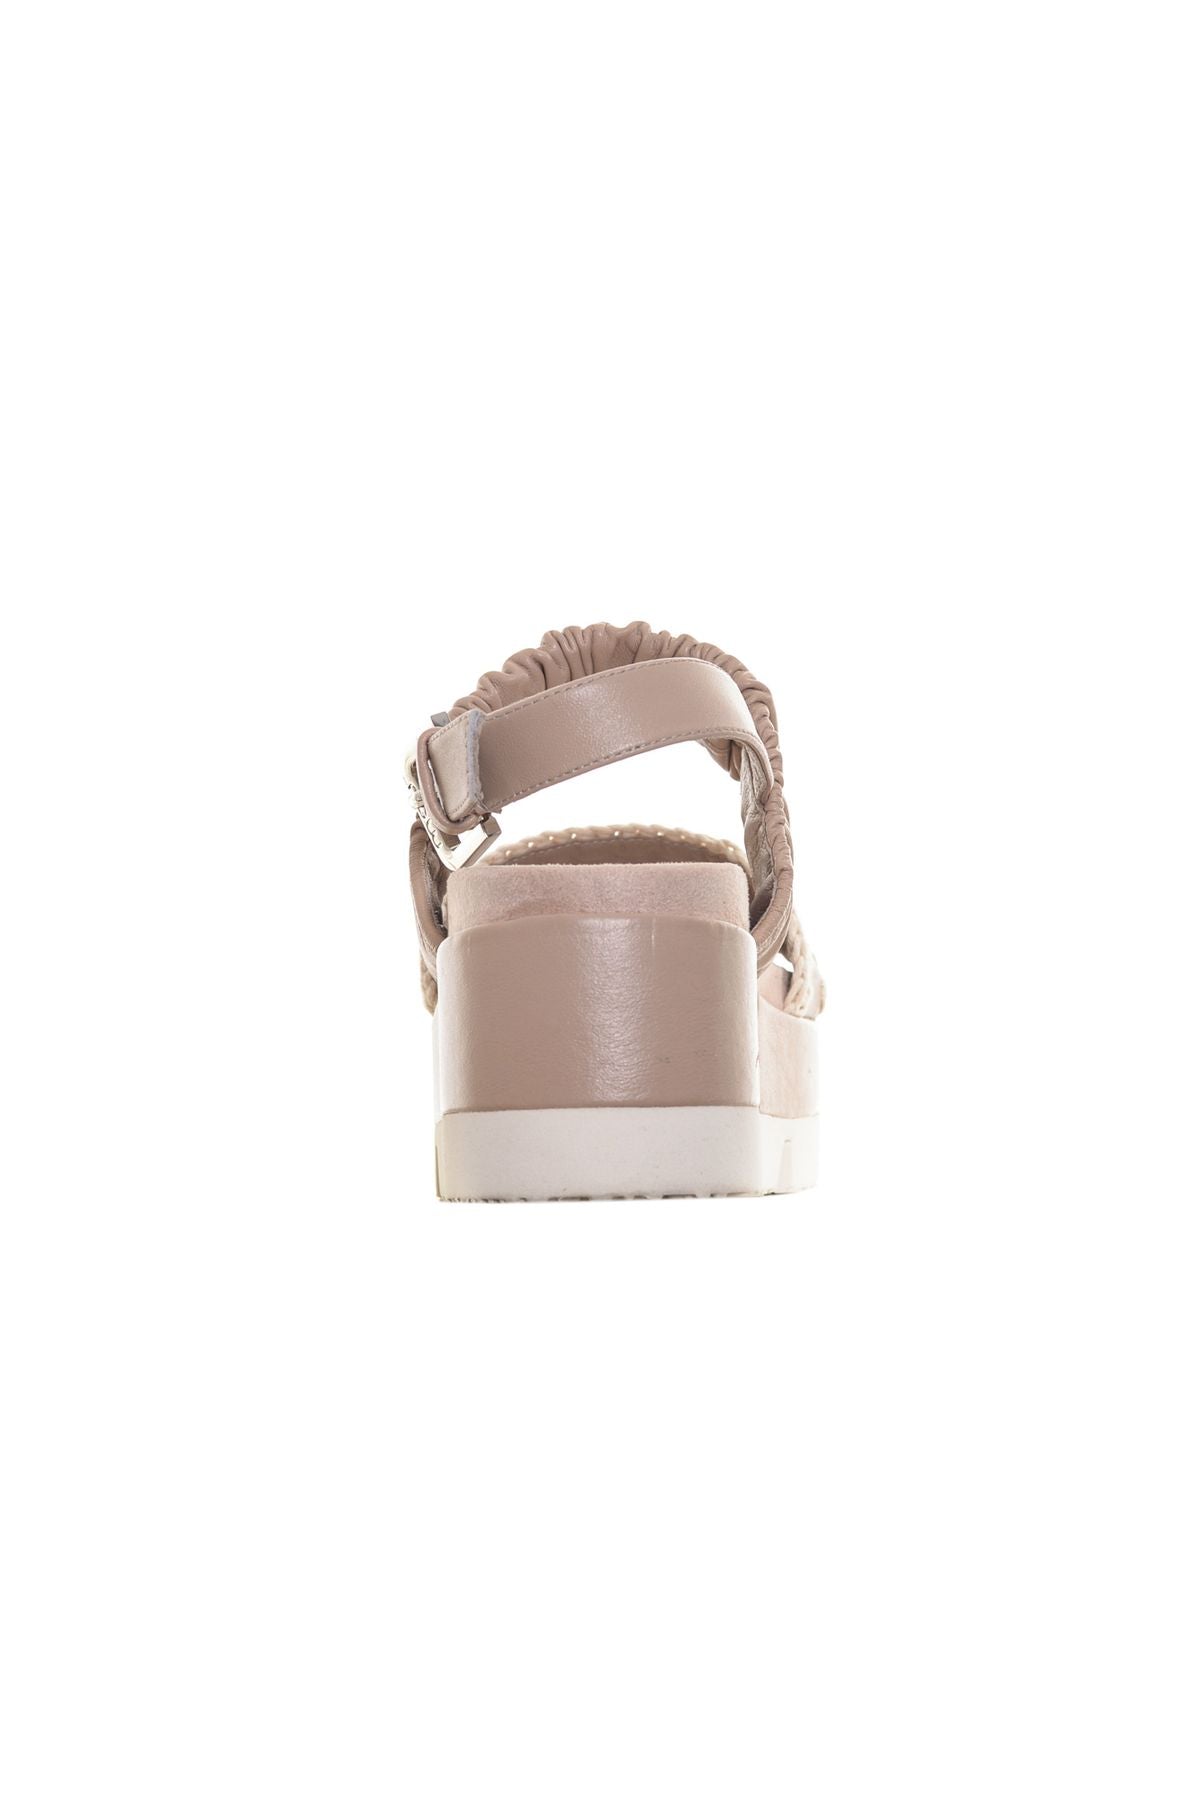 MOU Spring/Summer Sandals musw471001c